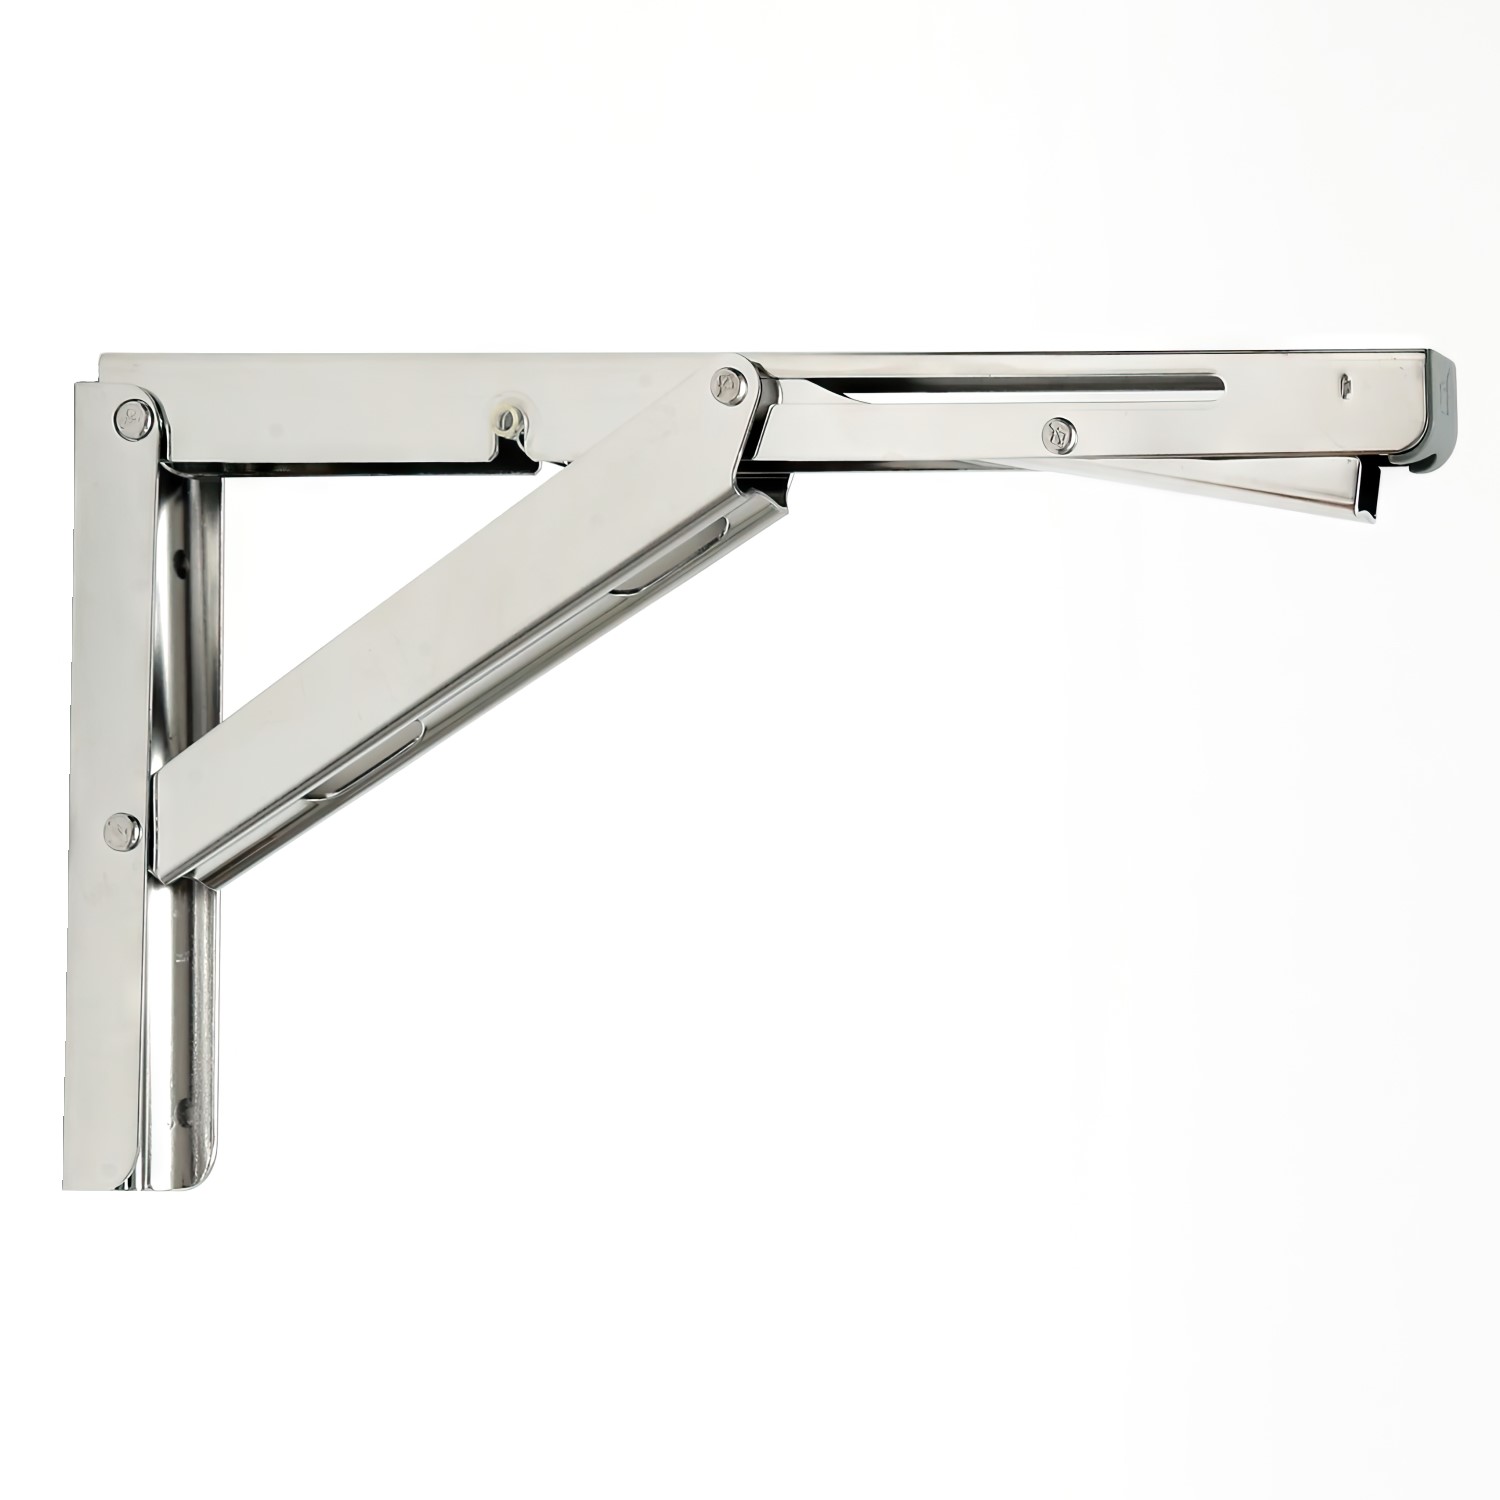 Folding bracket 303 mm stainless steel with damper